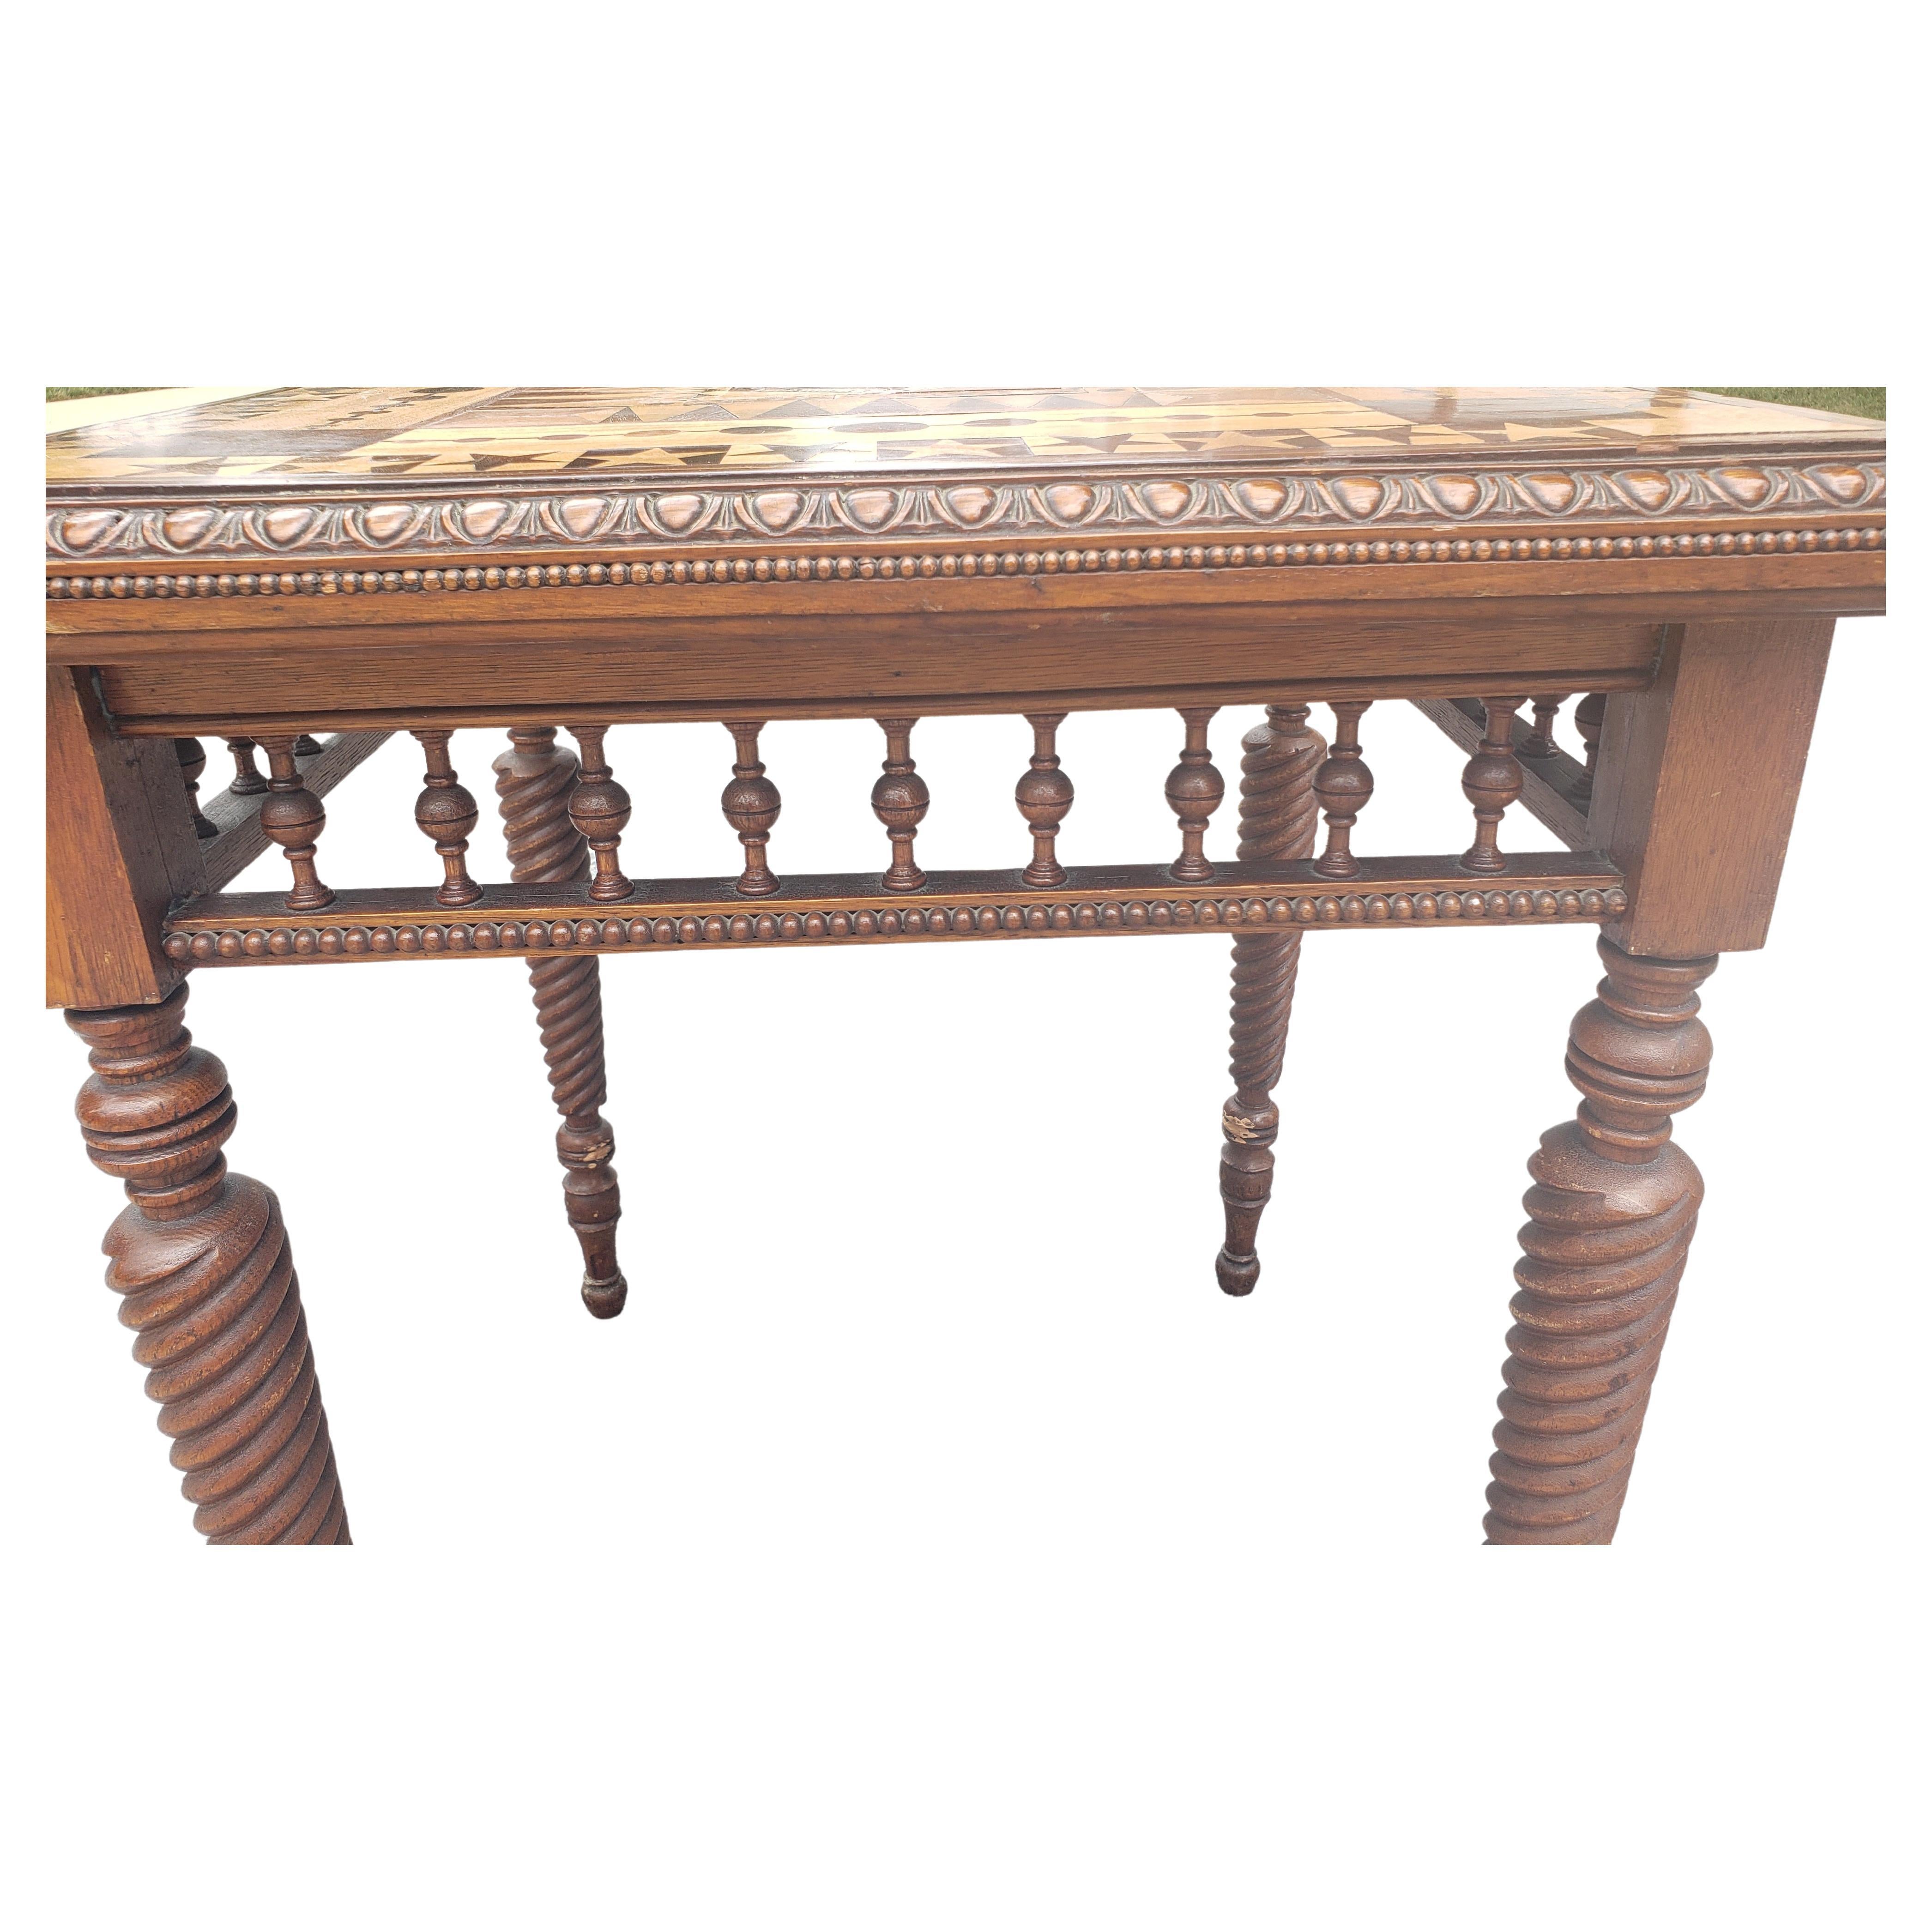 Late 19th C. Parquetry Mixed Woods and Turned Twisted Legs Card Tea Table For Sale 2